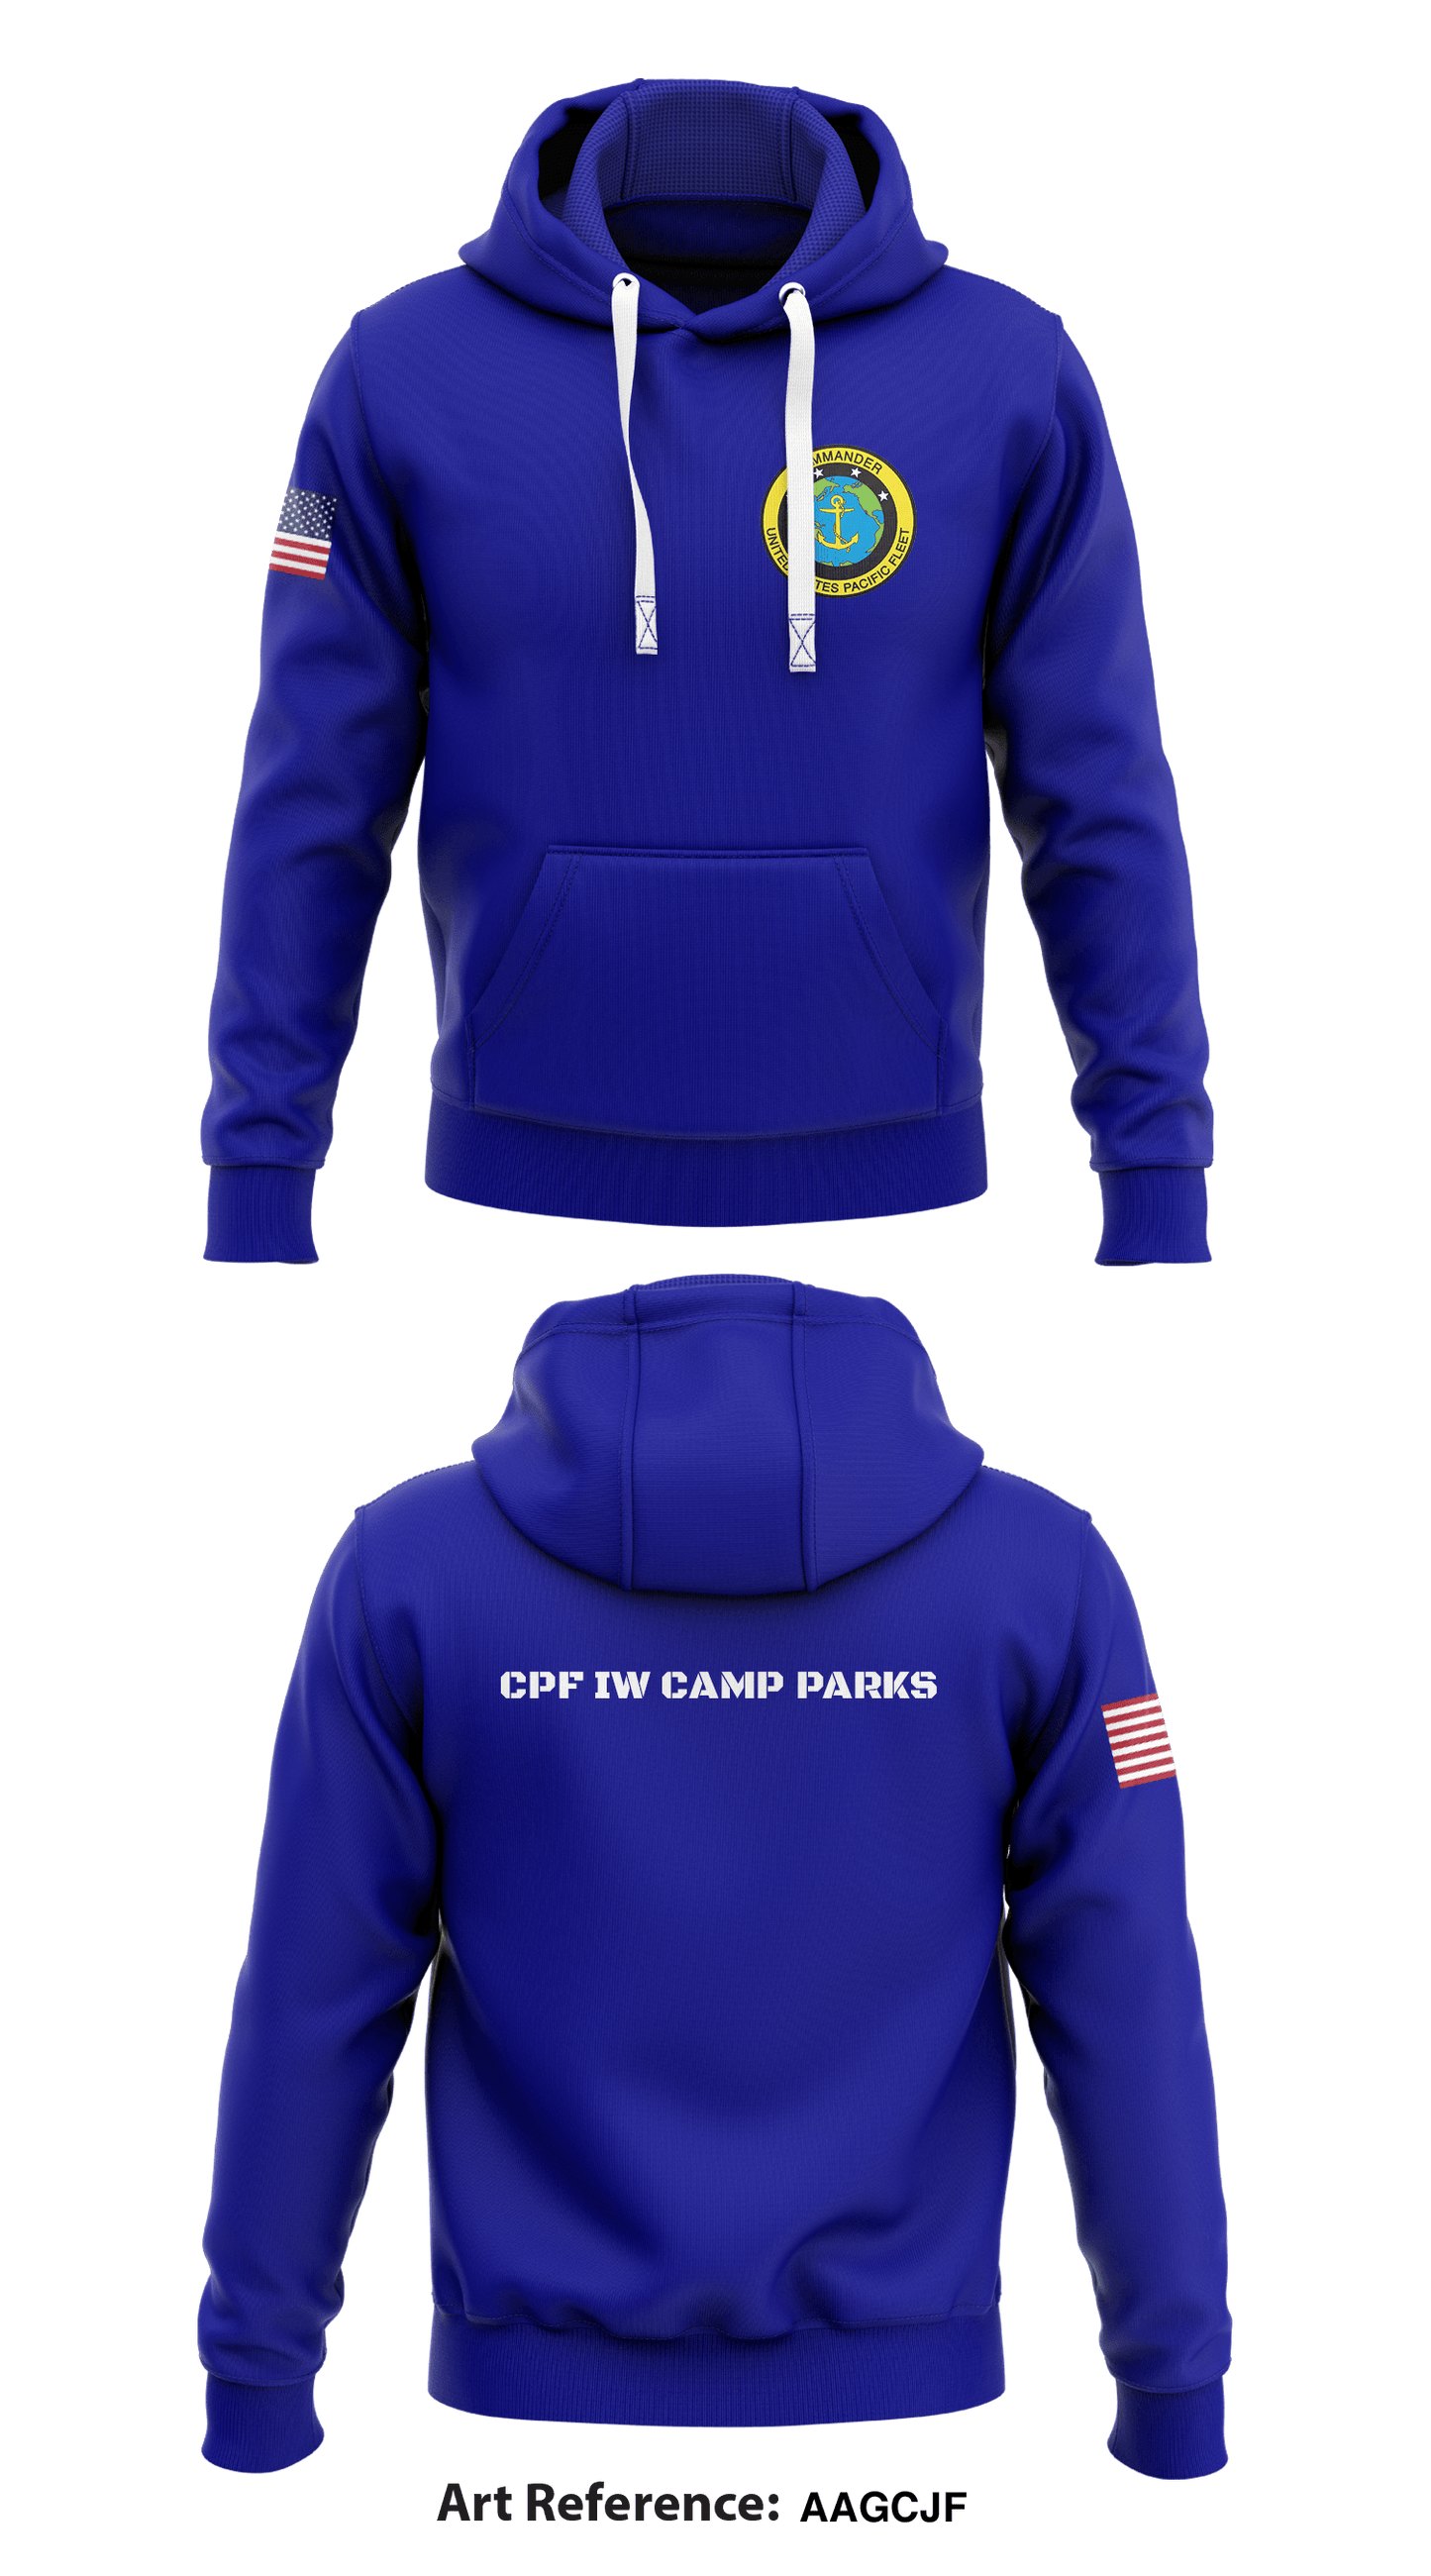 CPF IW CAMP PARKS Store 1 Core Men's Hooded Performance Sweatshirt - aAgcjf